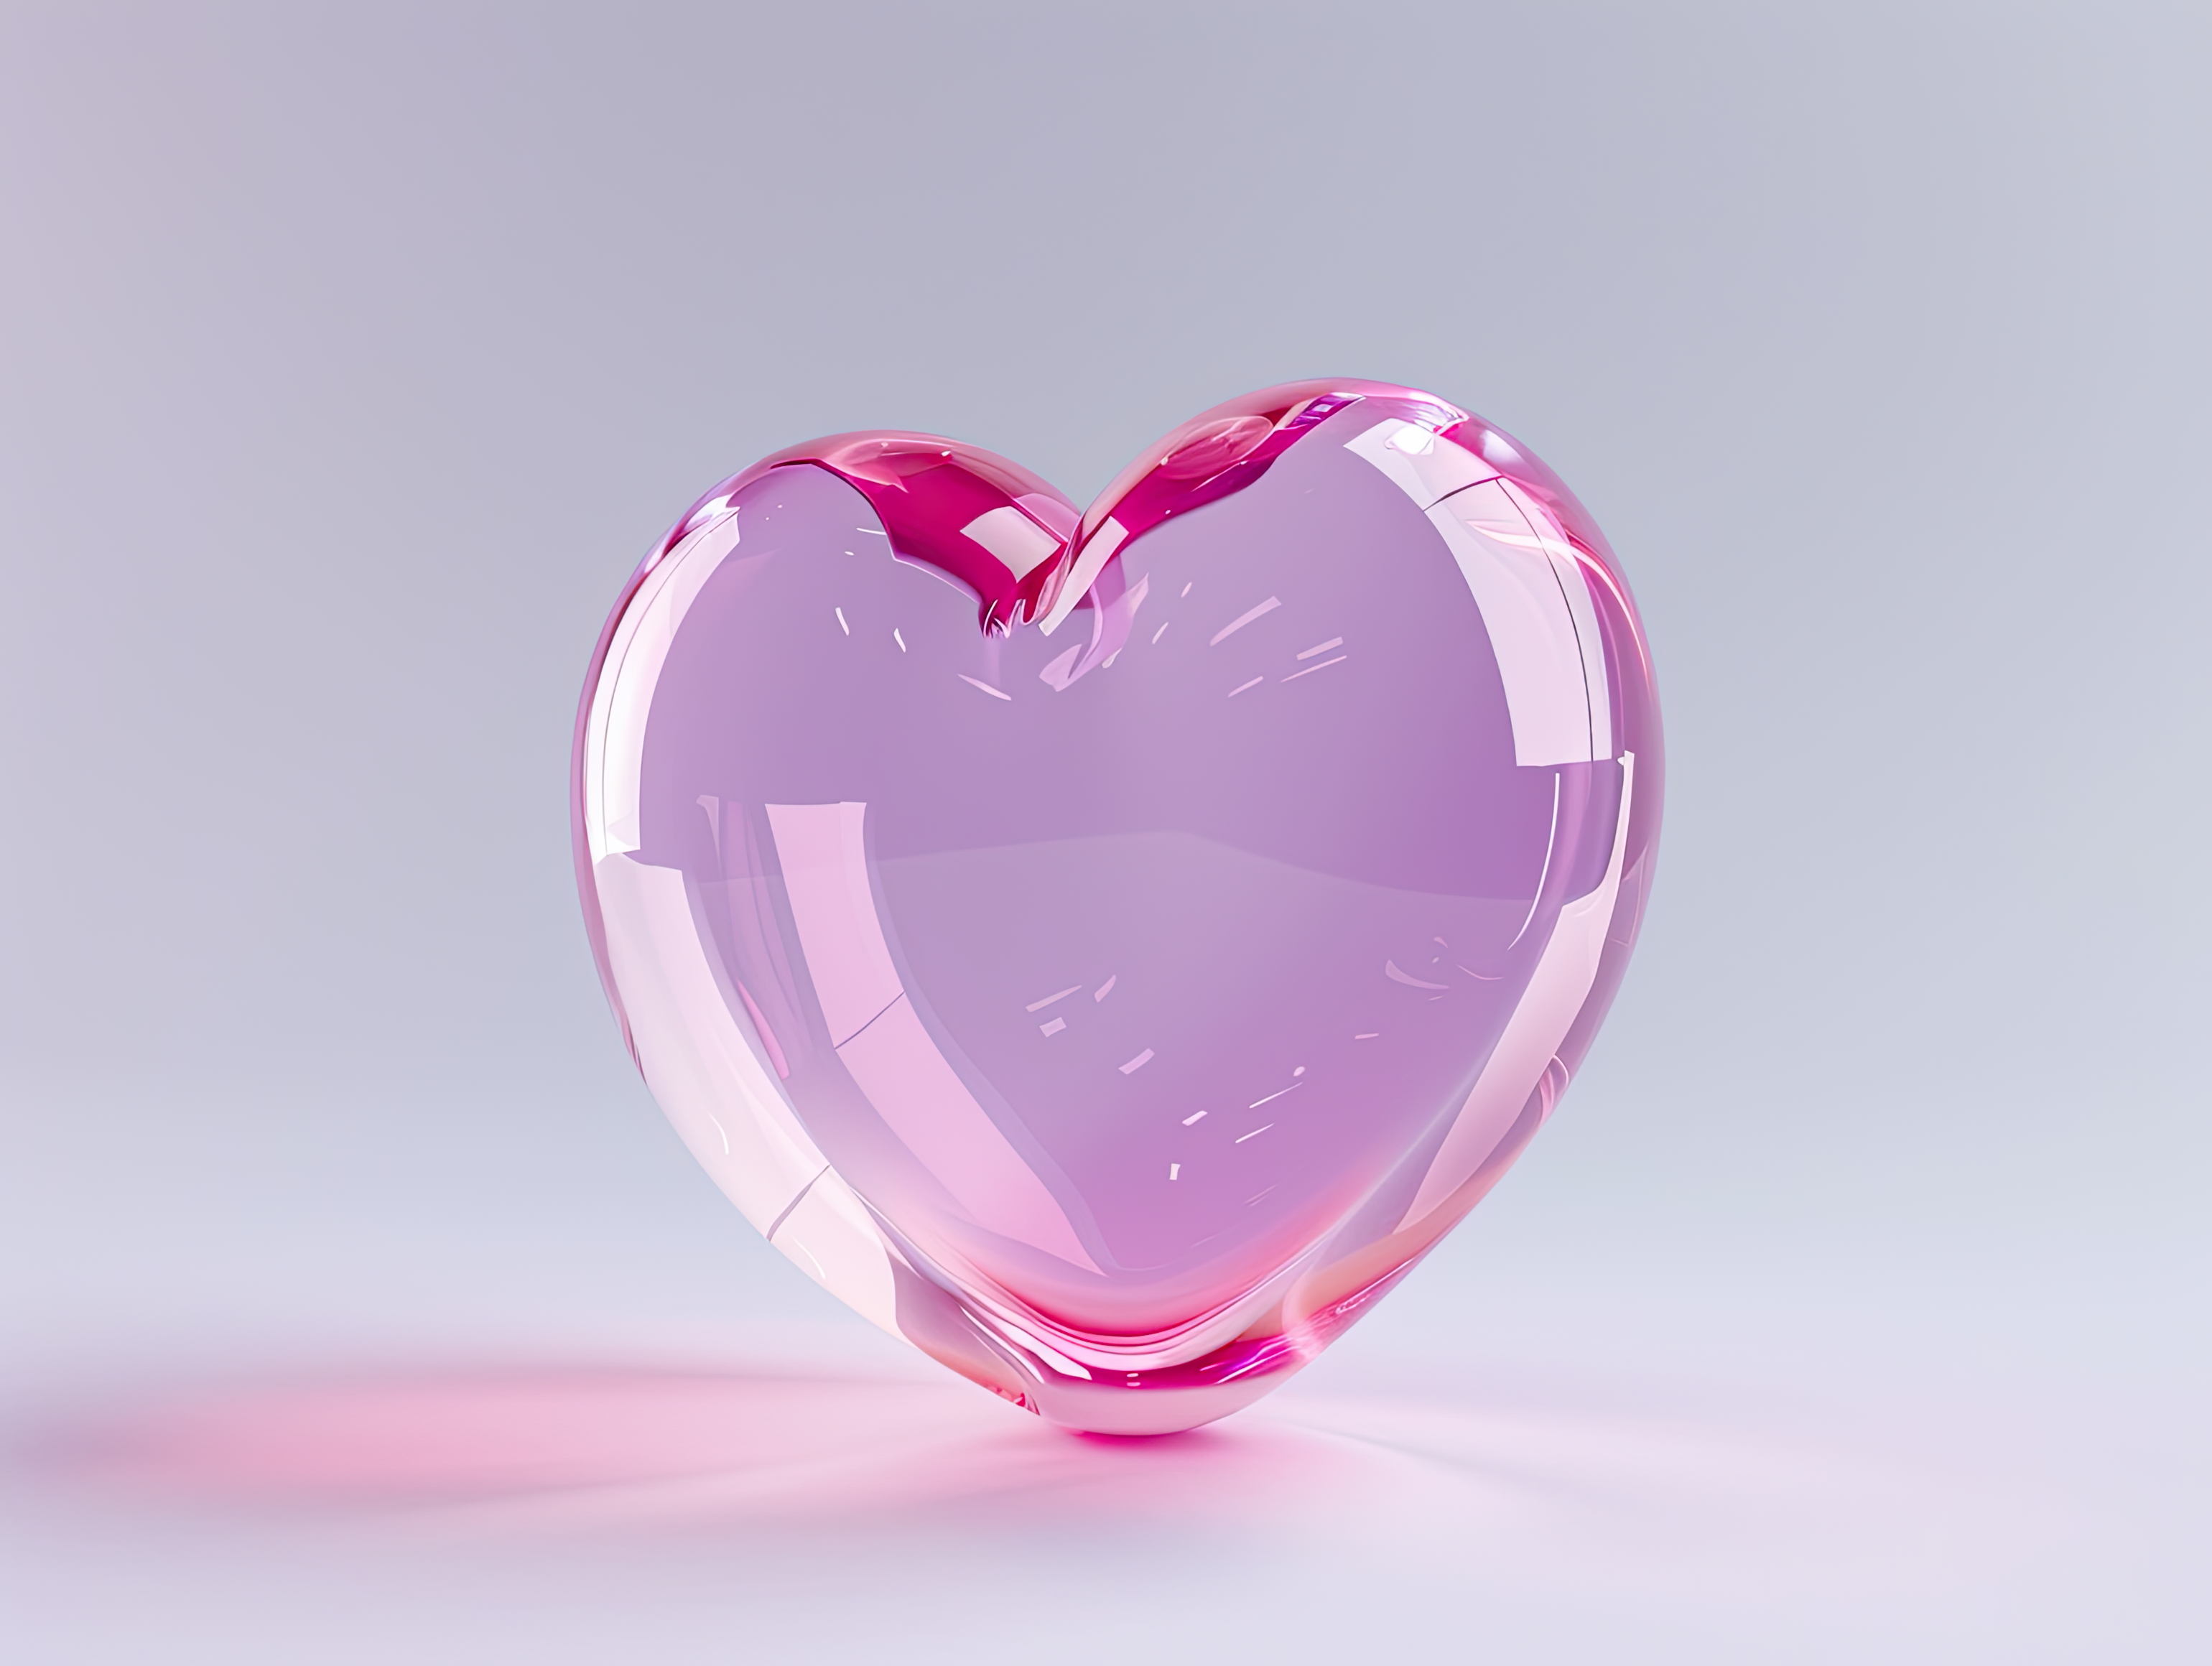 Glass heart, Love, wedding, marriage ceremony and Valentine's Day romantic celebration 3d concept